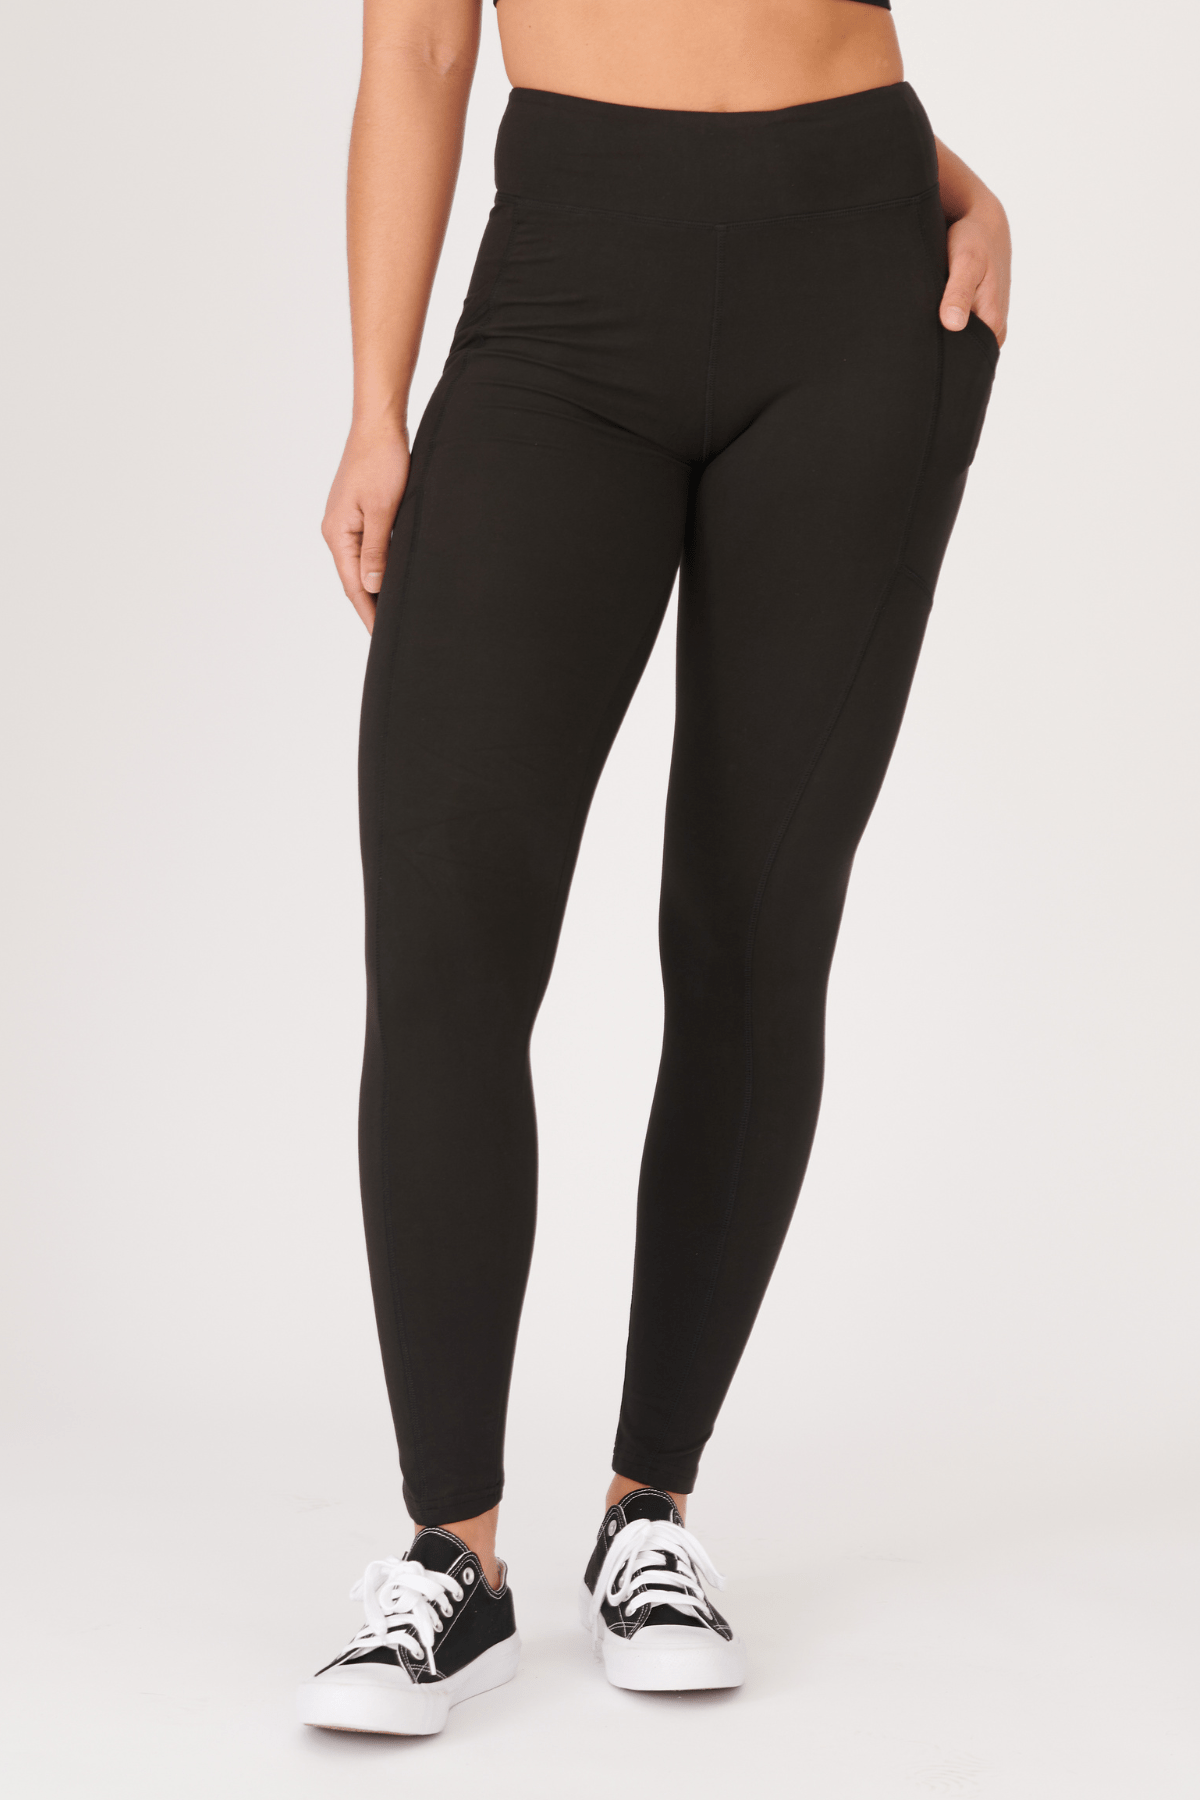 Buy BIBA Black Solid Fitted Poly Cotton Womens Leggings | Shoppers Stop